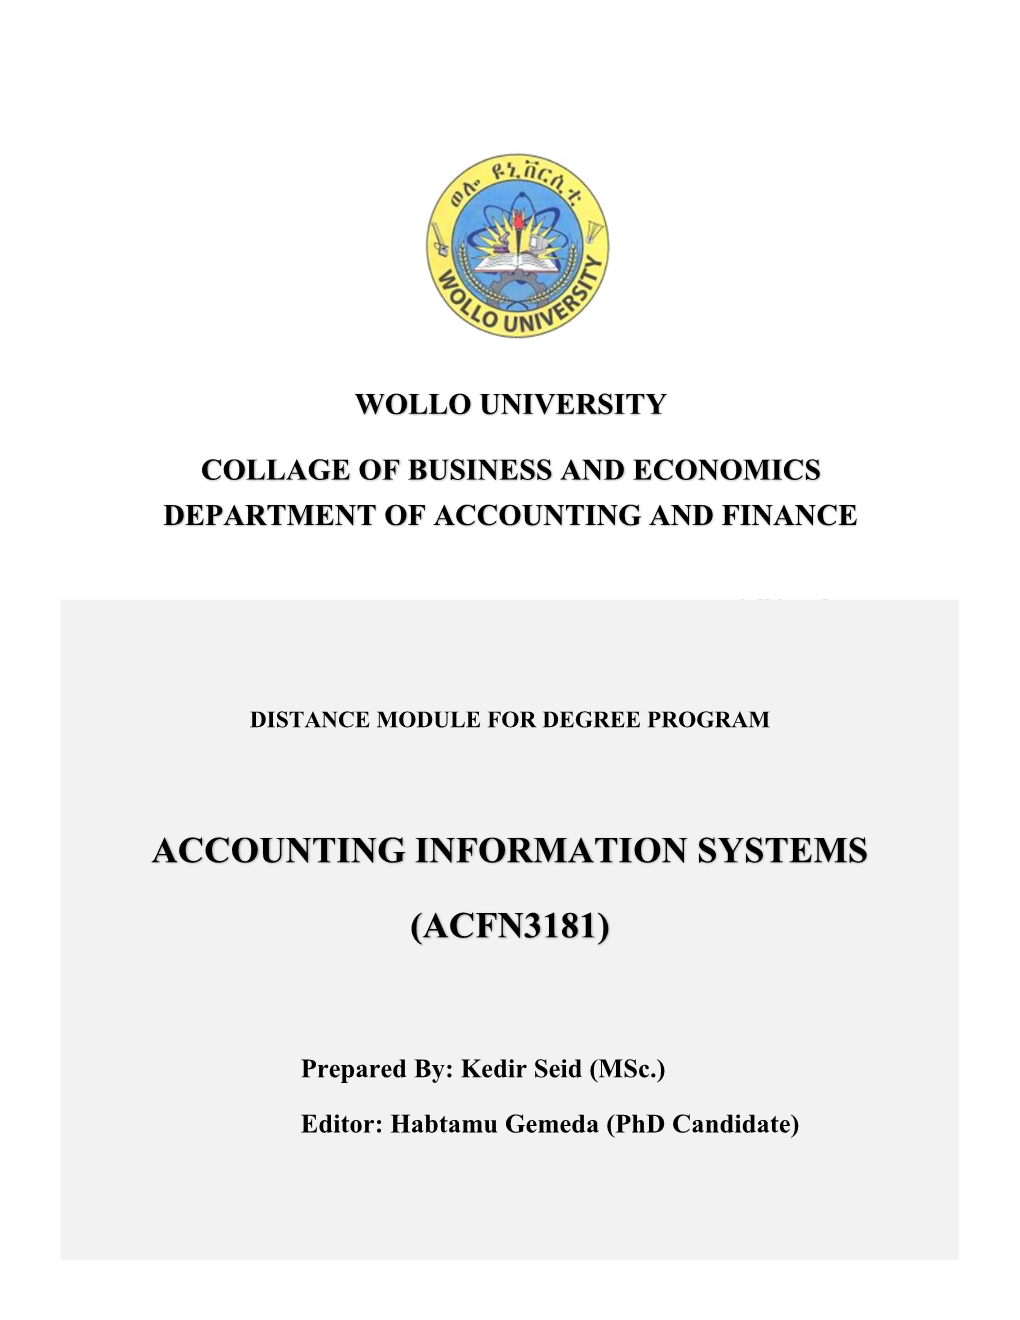 Accounting Information Systems (Acfn3181)